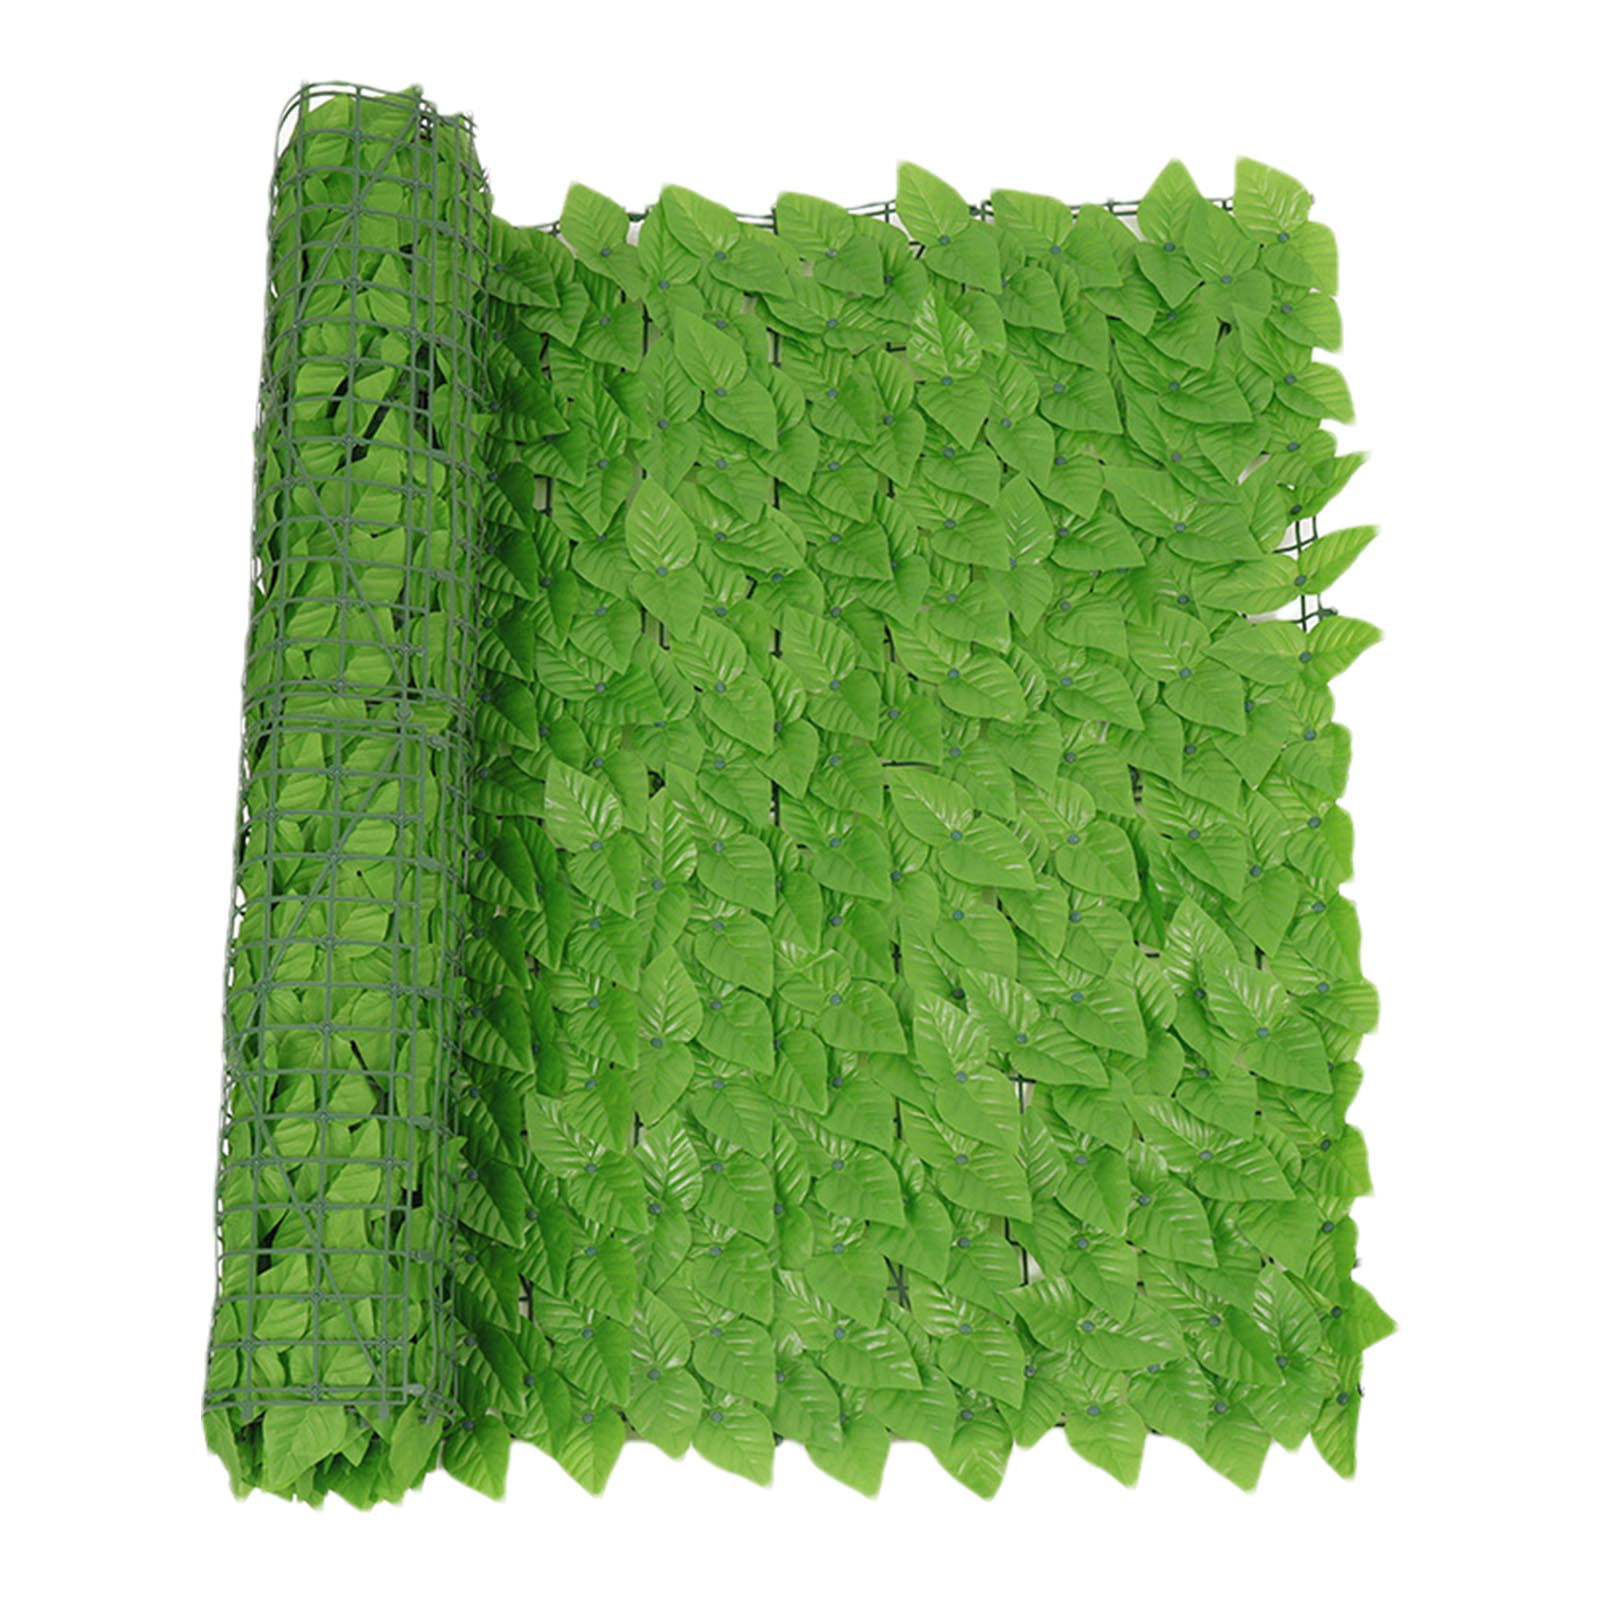 Trarodic Artificial Ivy Fence Screening - Expanding Trellis Fence Roll ...